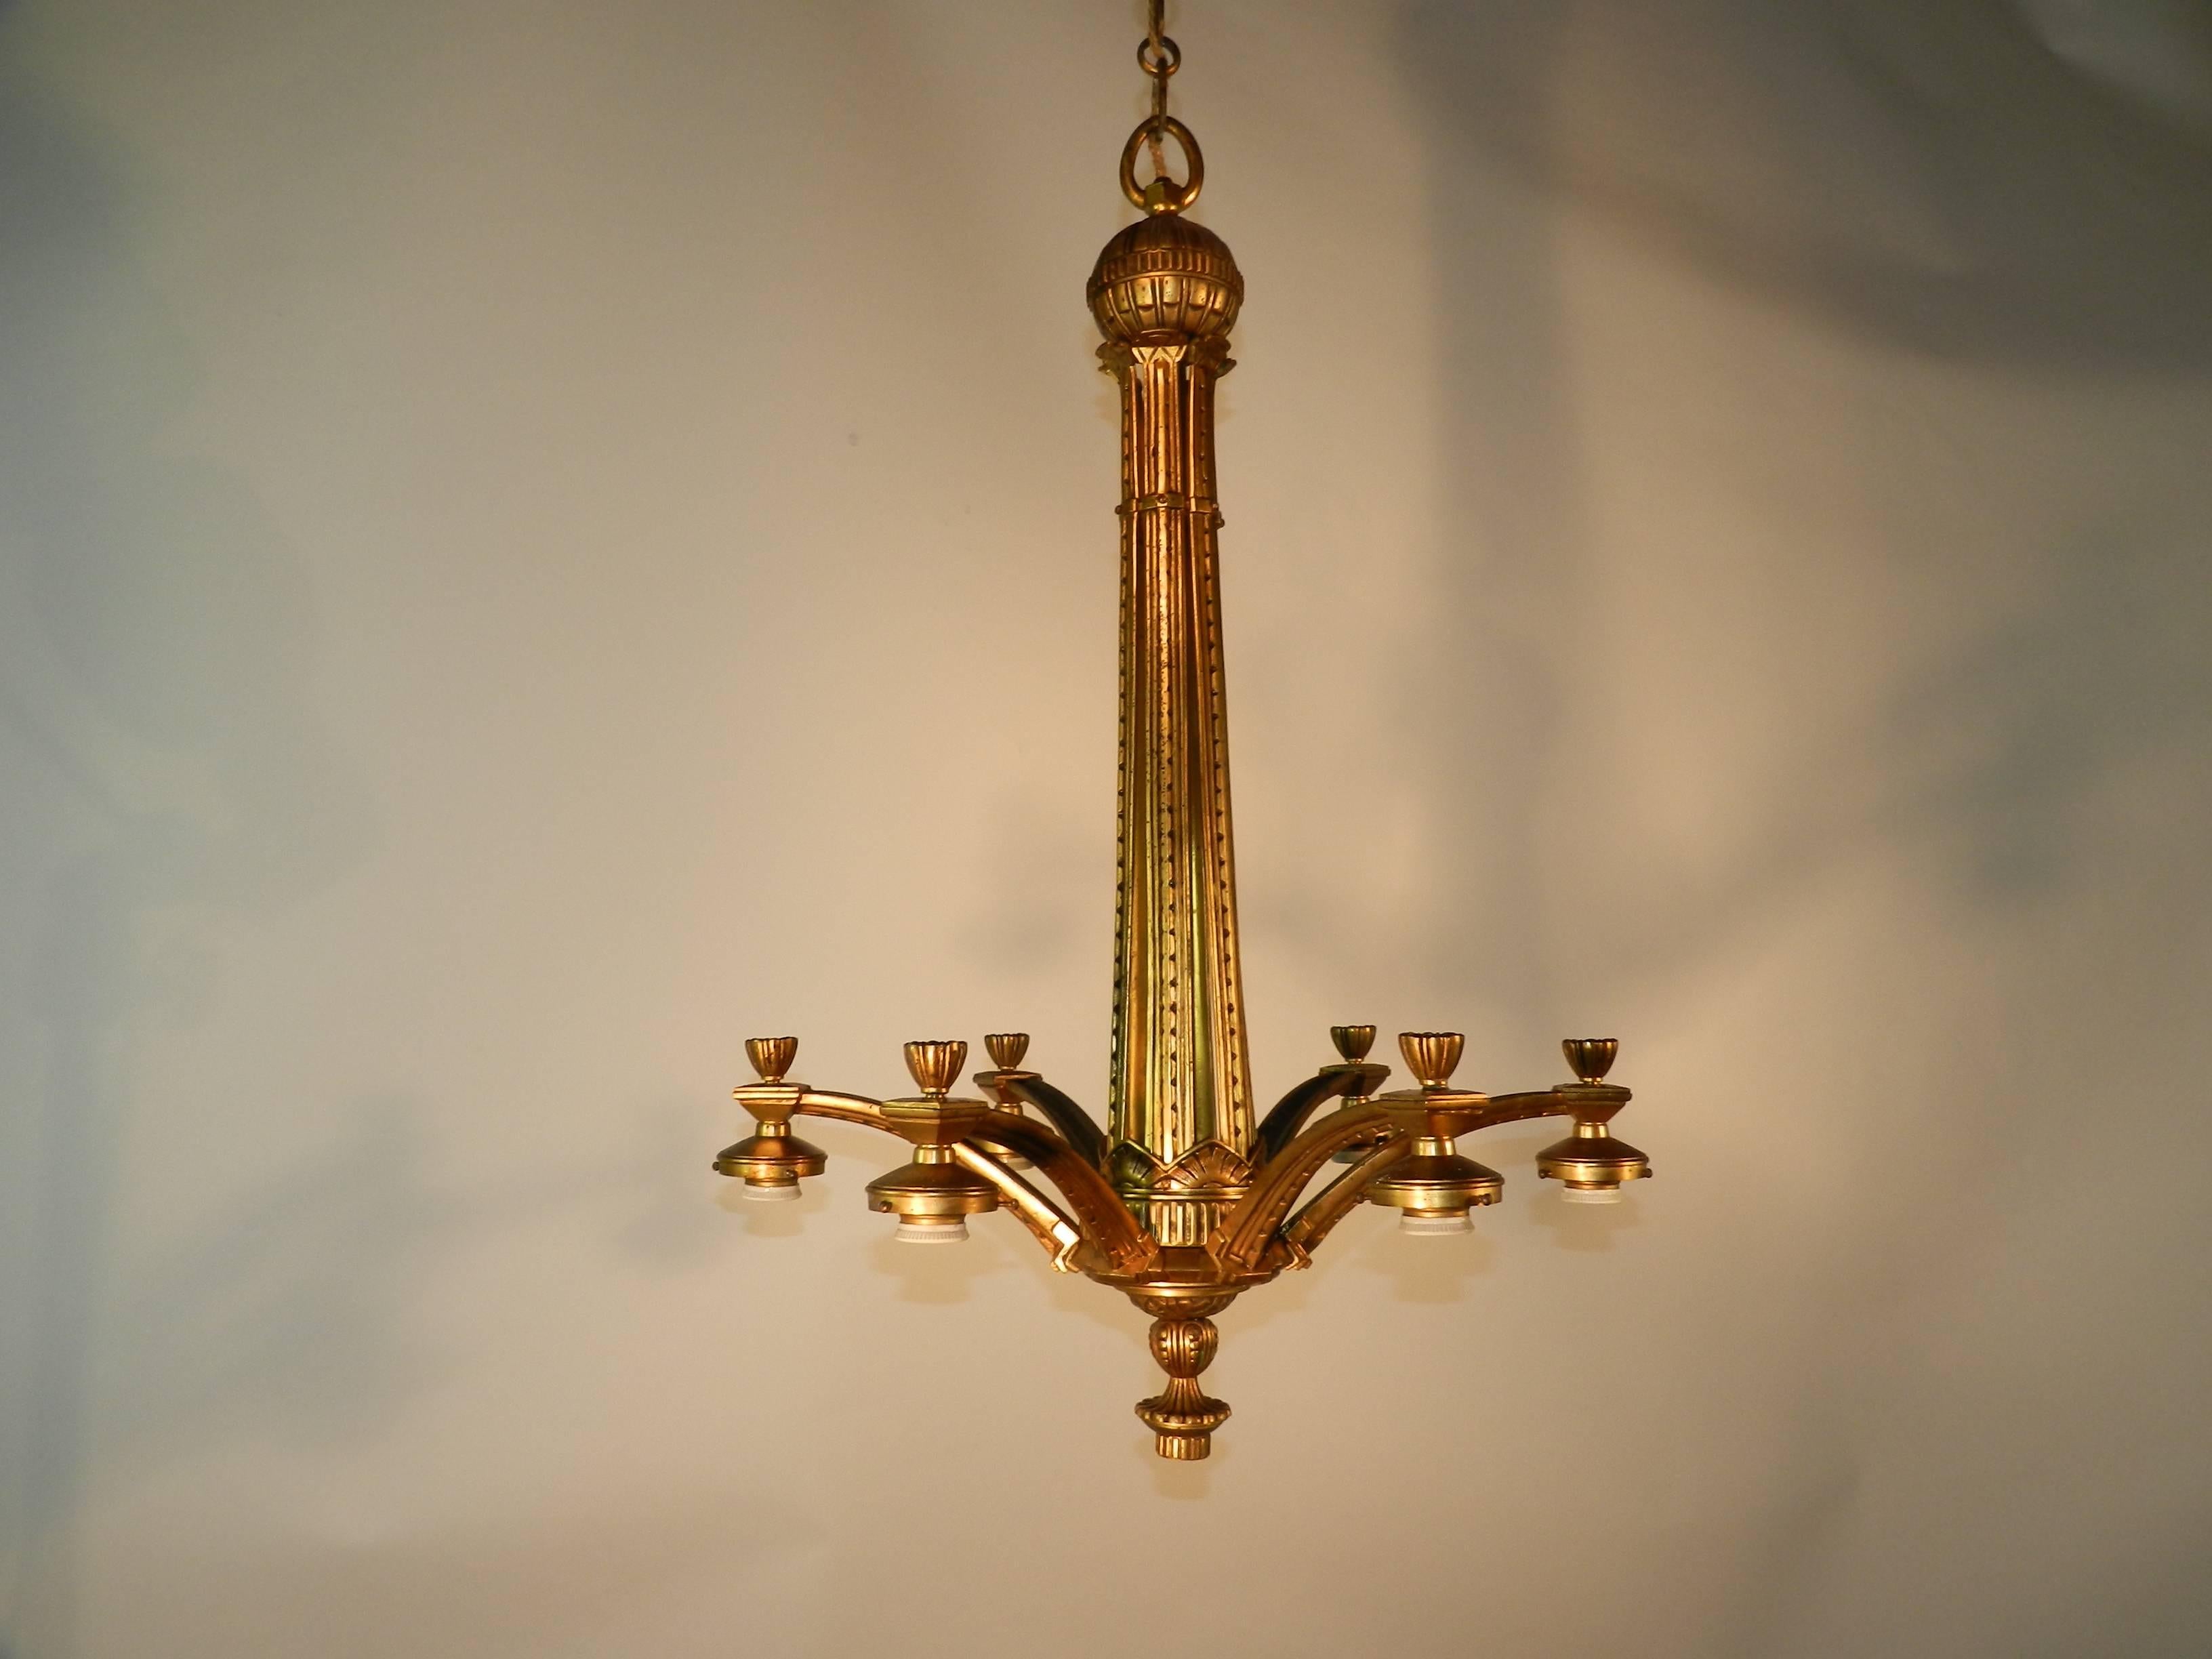 Art Deco chandelier in bronze, circa 1930.
Tulip-shaped lampshade missing.